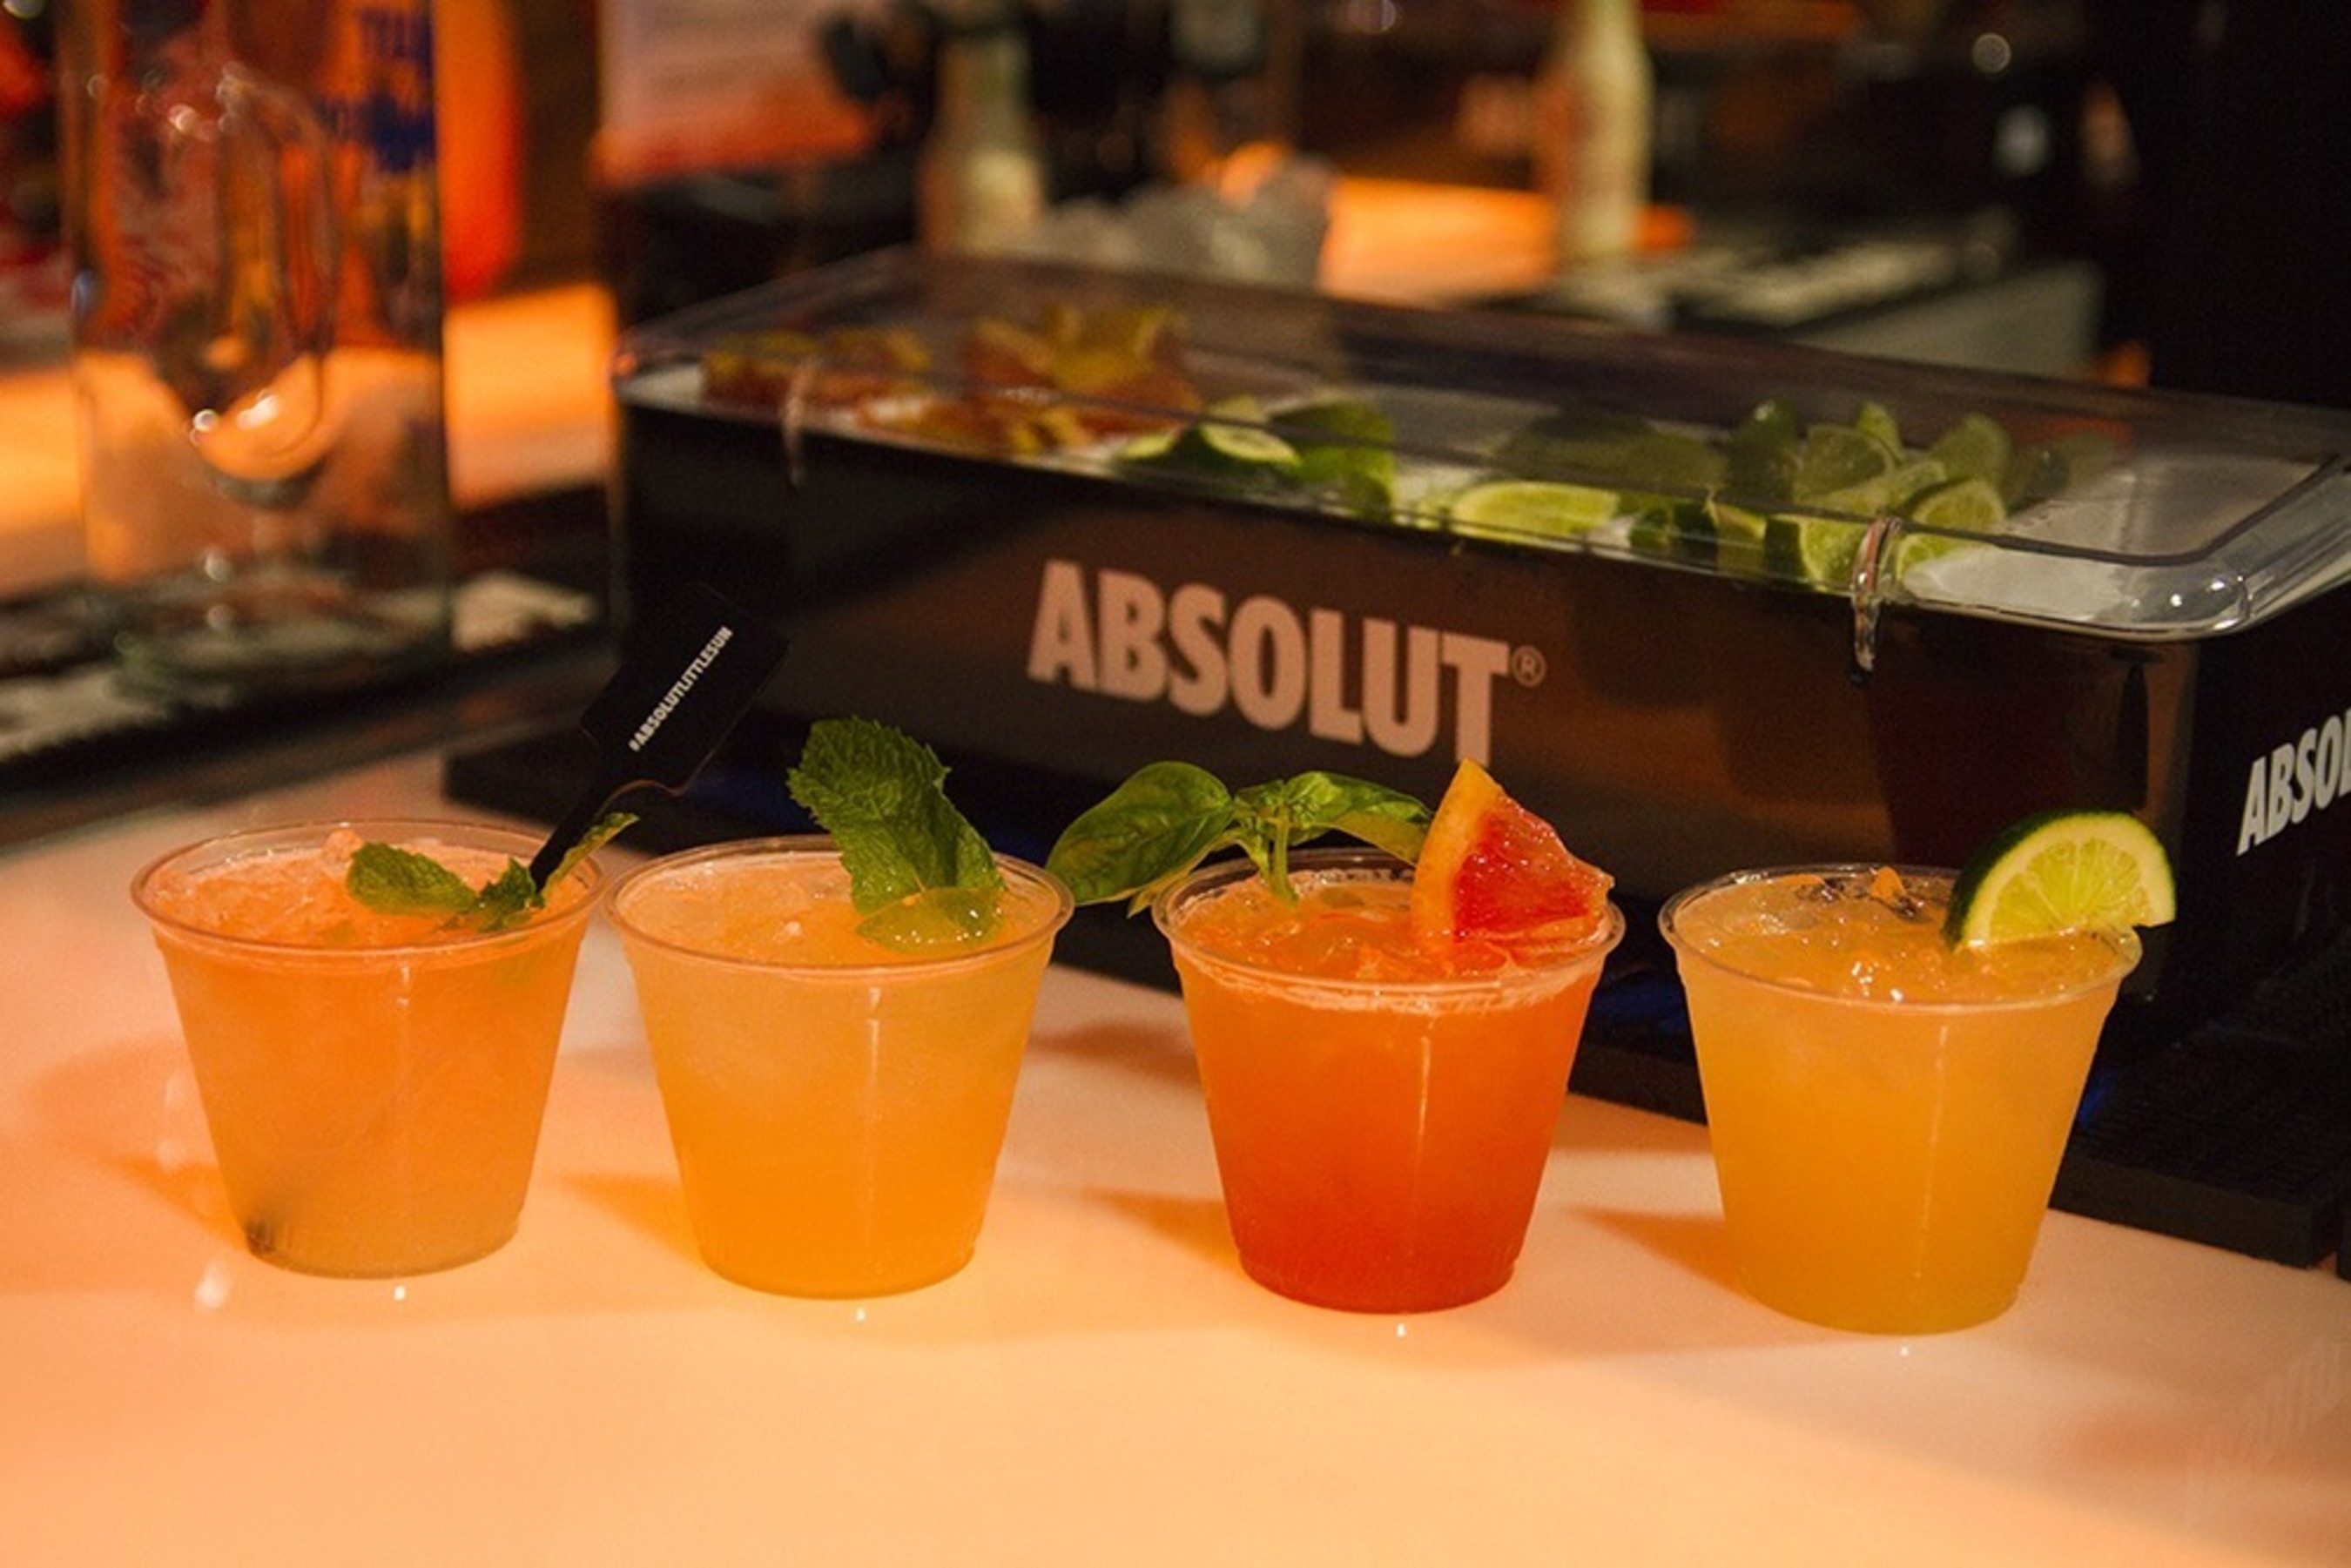 Absolut Little Sun serves up custom curated cocktails at the Coachella Valley Music and Arts Festival. (PRNewsFoto/Pernod Ricard USA)